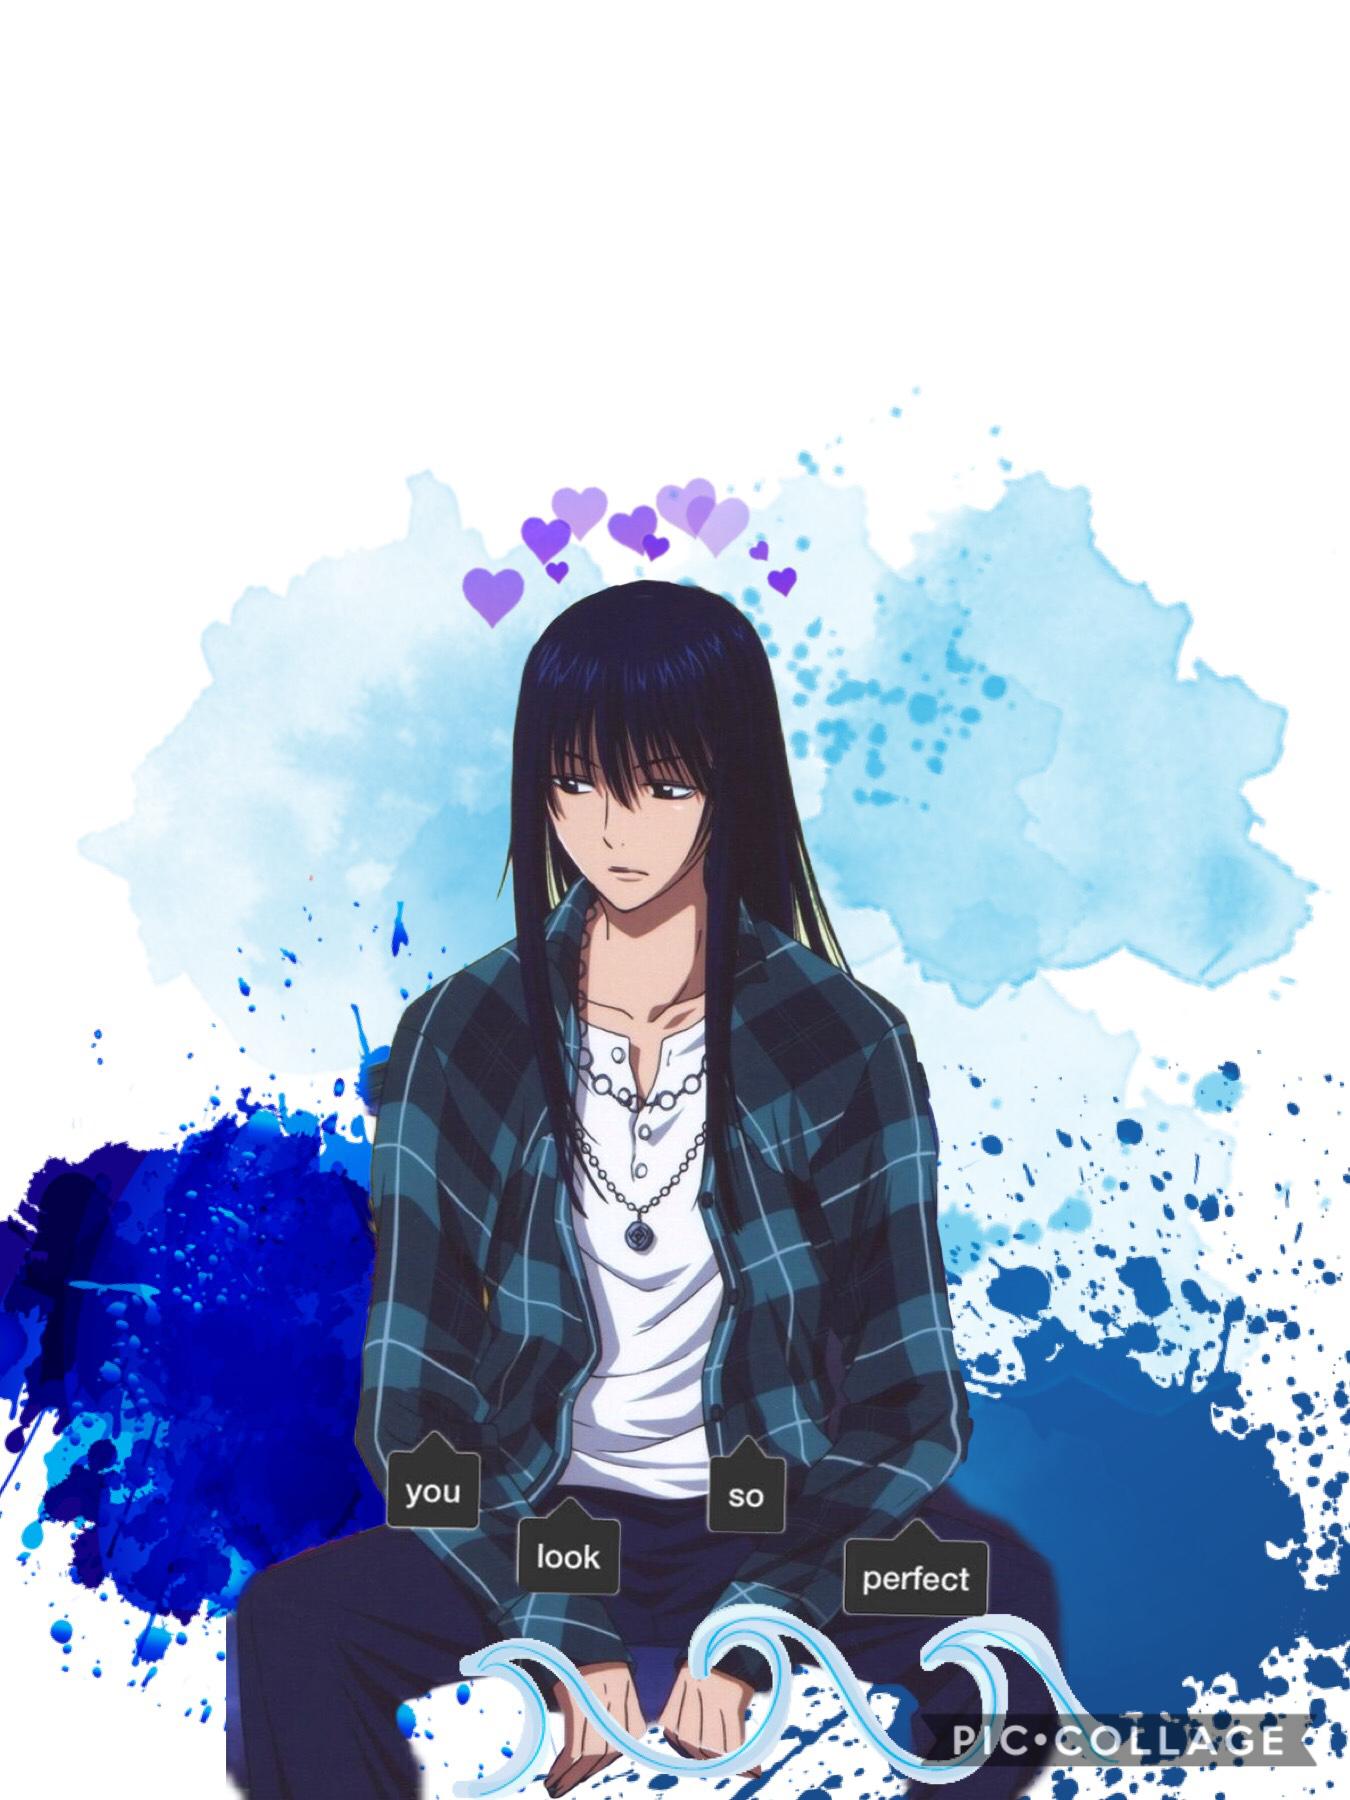 This is kanda from D.gray man (tap) 
He is my manz and my friends manz we share him lol